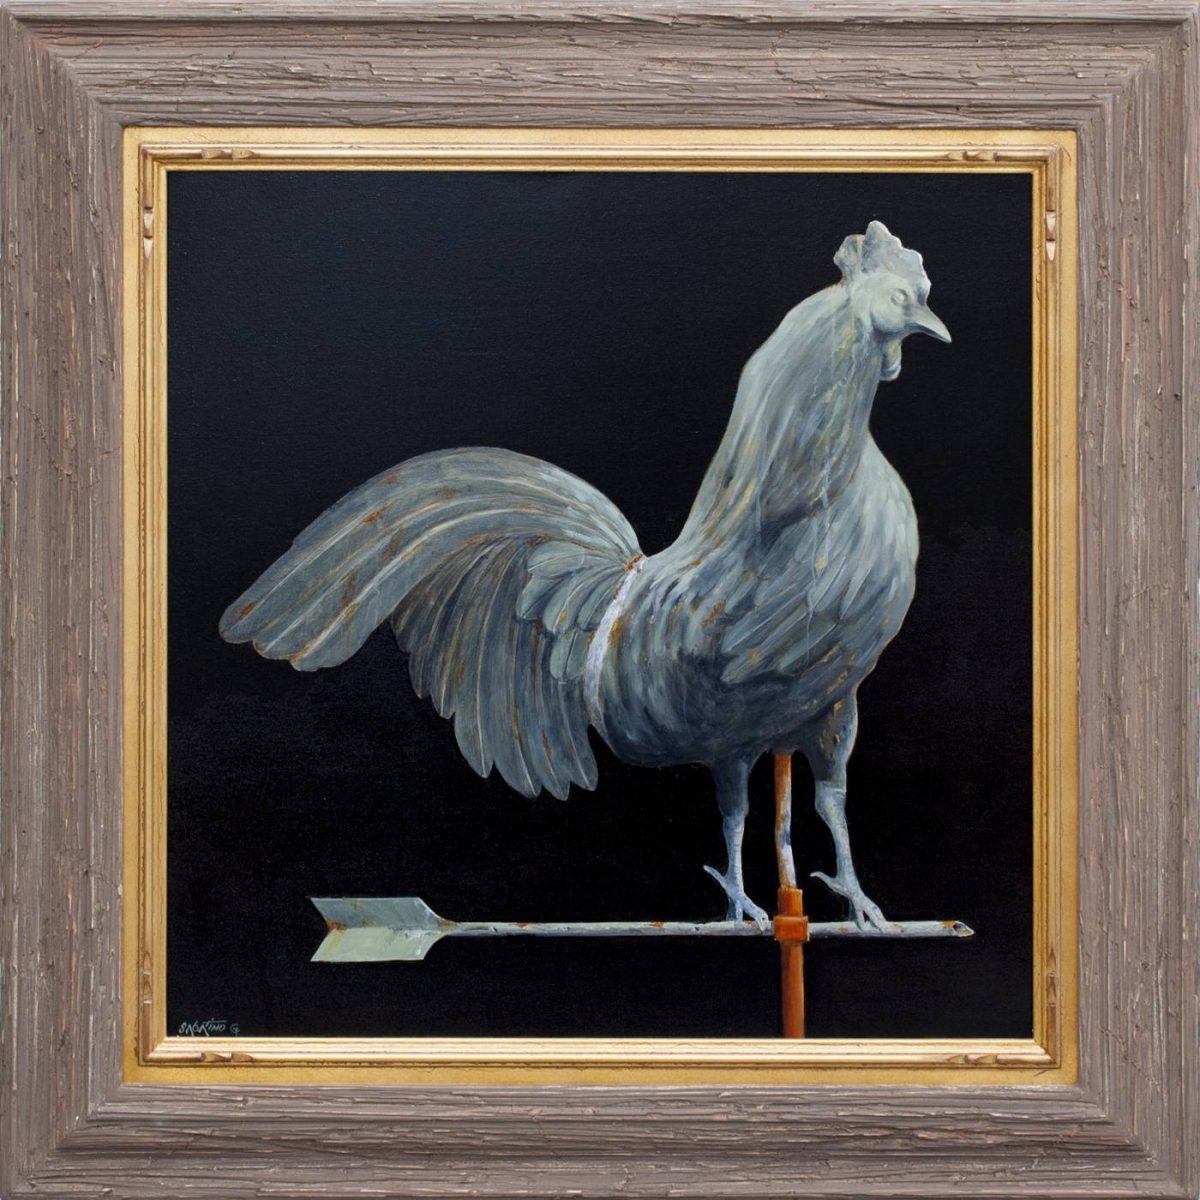 Old Copper Rooster by artist Chuck Sabatino